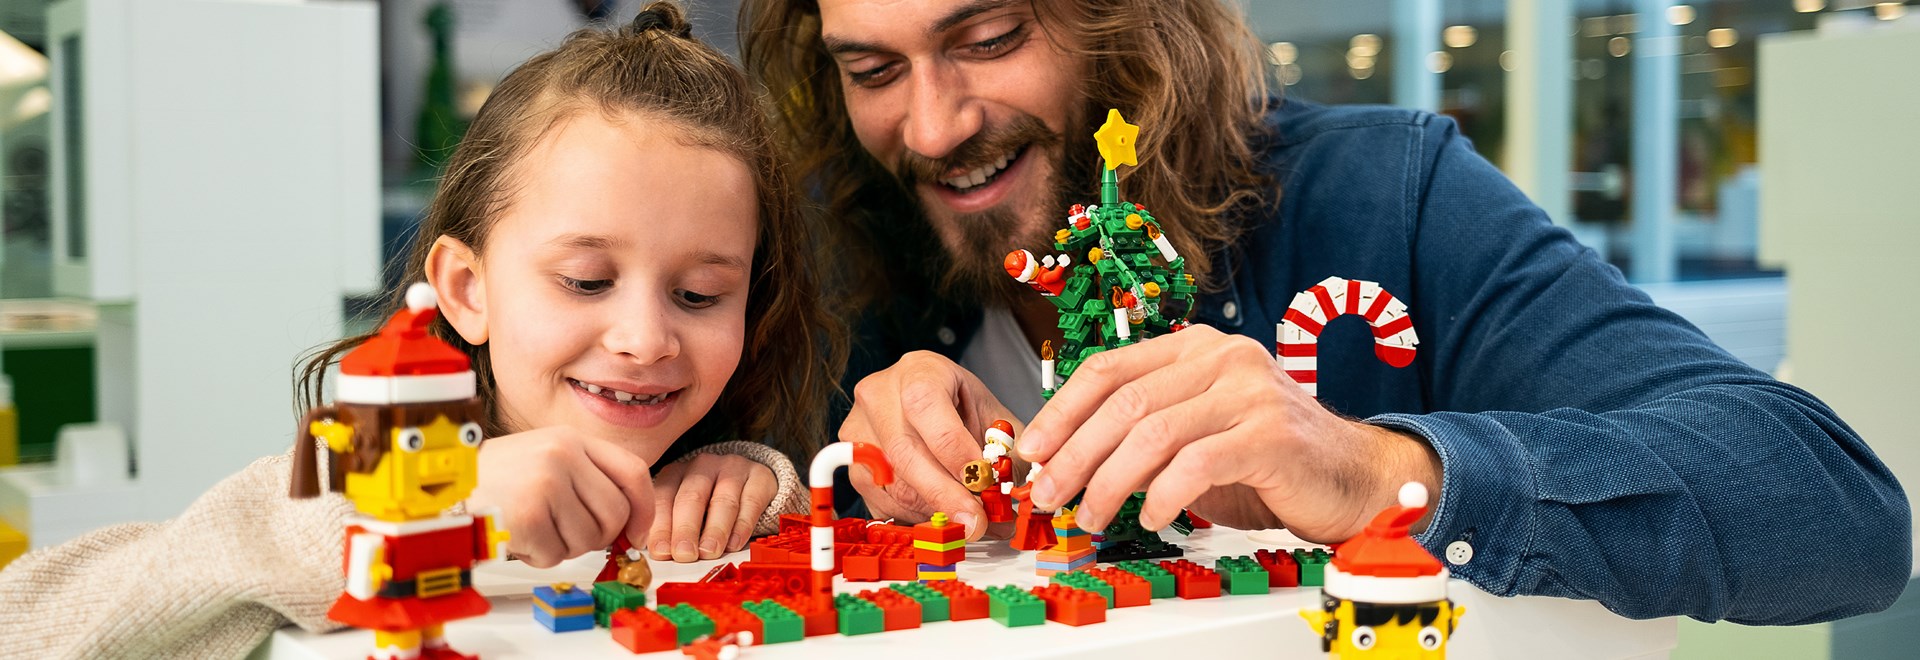 Holiday in LEGO House